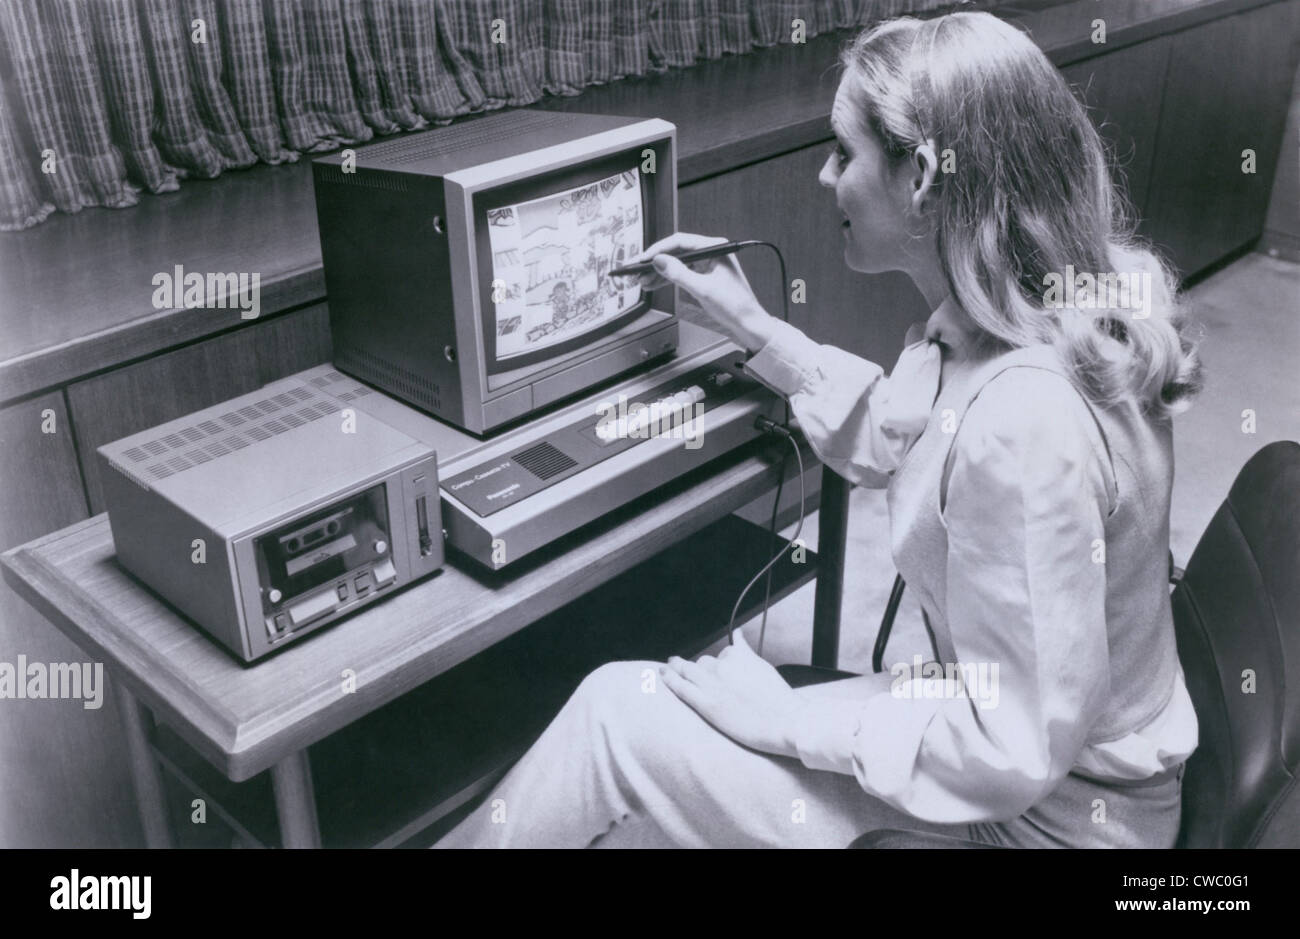 Matsushita Computer Cassette-TV and home computer system used a touch screen interface and a tape cassette drive. Ca. 1980. Stock Photo